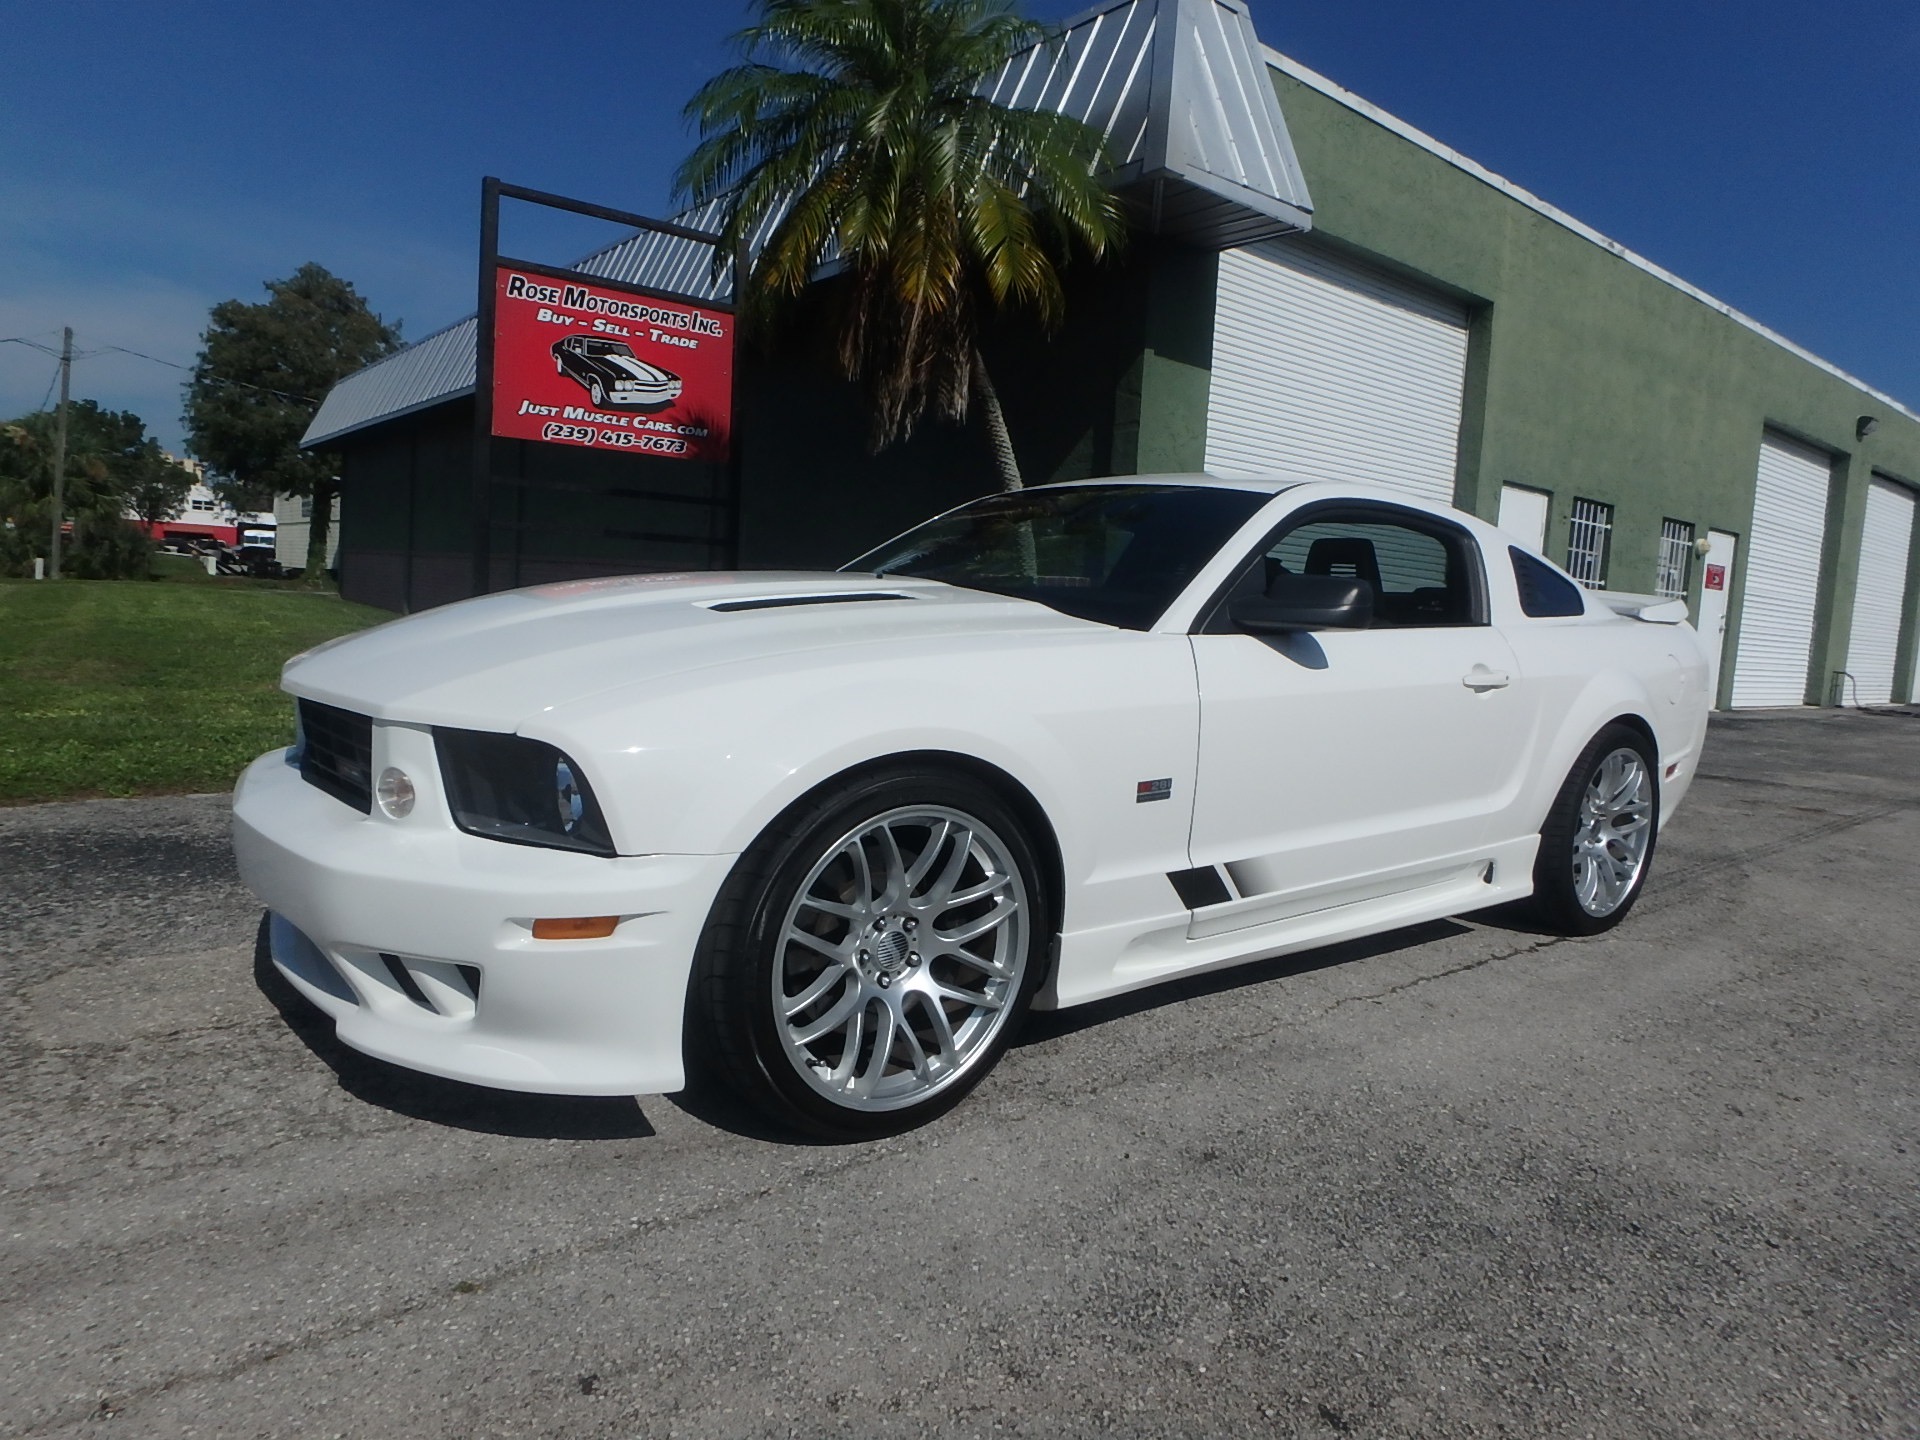 Used 2005 Ford Mustang Saleen GT Deluxe For Sale $24900 Rose.